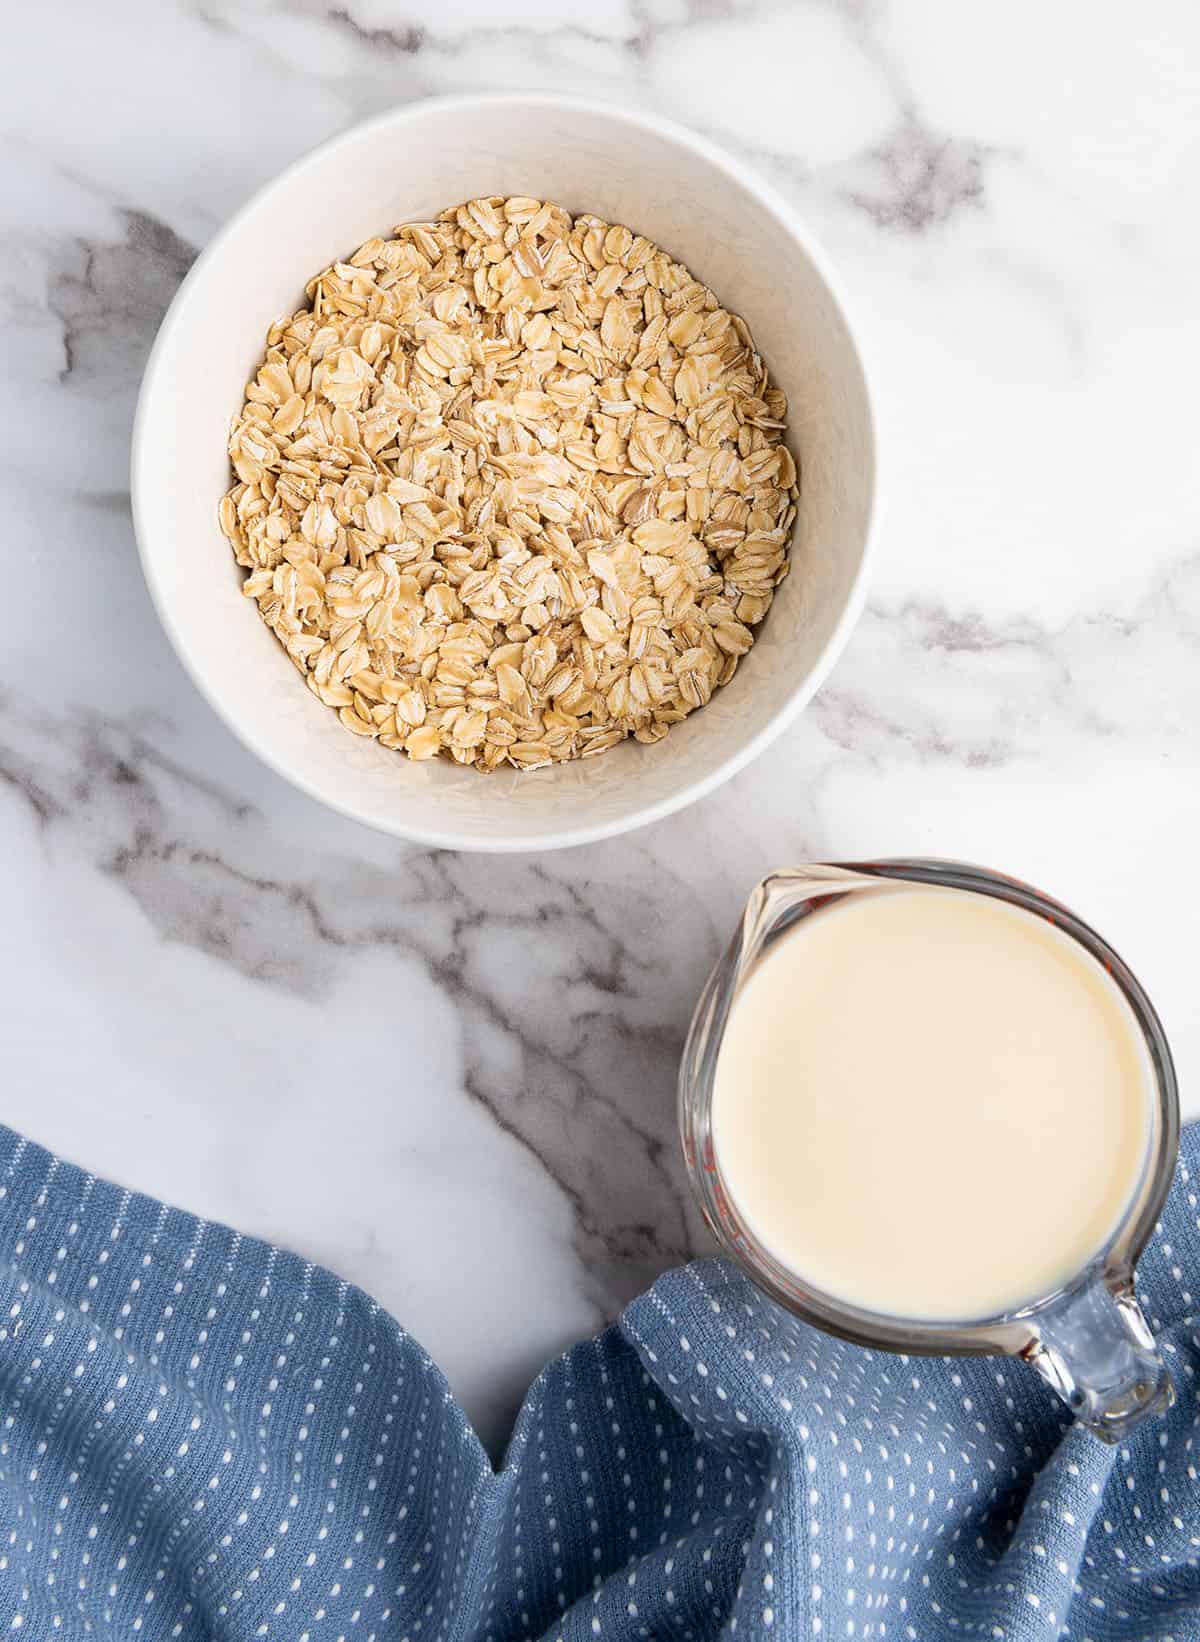 The soy milk and oats for the overnight oats.